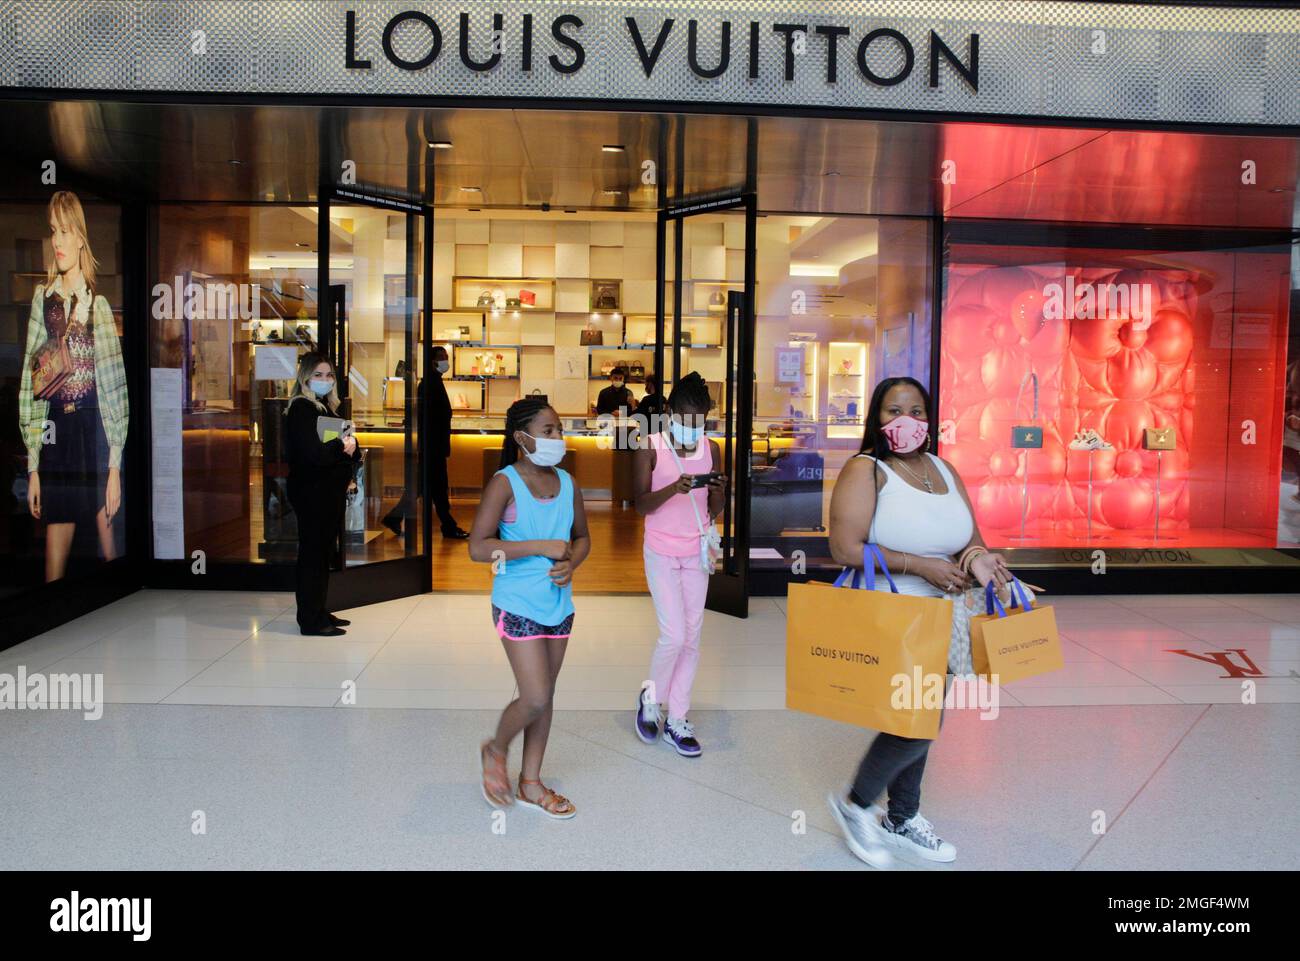 Sharnae Mooreer, right, with daughters, Kimora, 9, left, and Kayla 8, shop  at the Louis Vuitton boutique at the opening of Beverly Center shopping  mall during the coronavirus pandemic in Los Angeles Friday, May 29, 2020.  (AP Photo/Damian Dovarganes